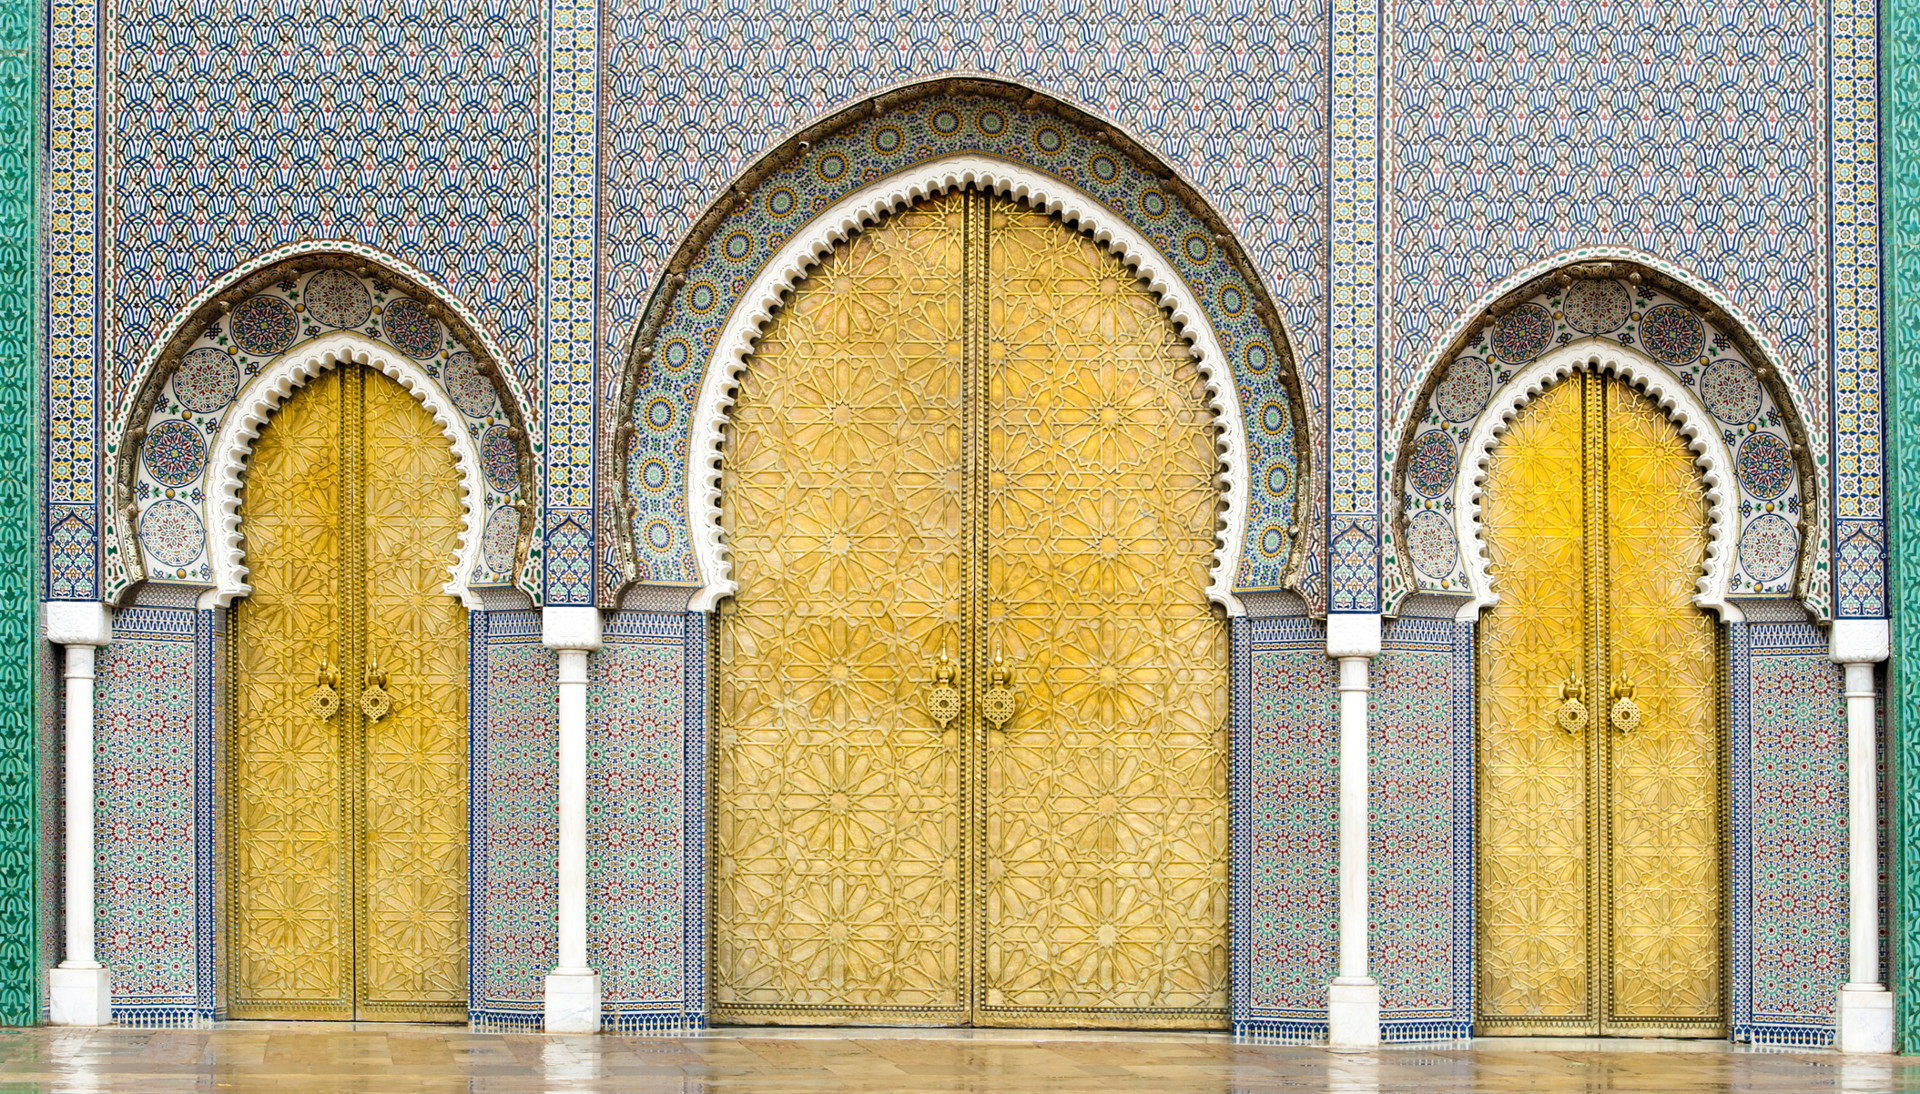 Custom Travel Planner Network-Morocco-Royal Palace in Fez